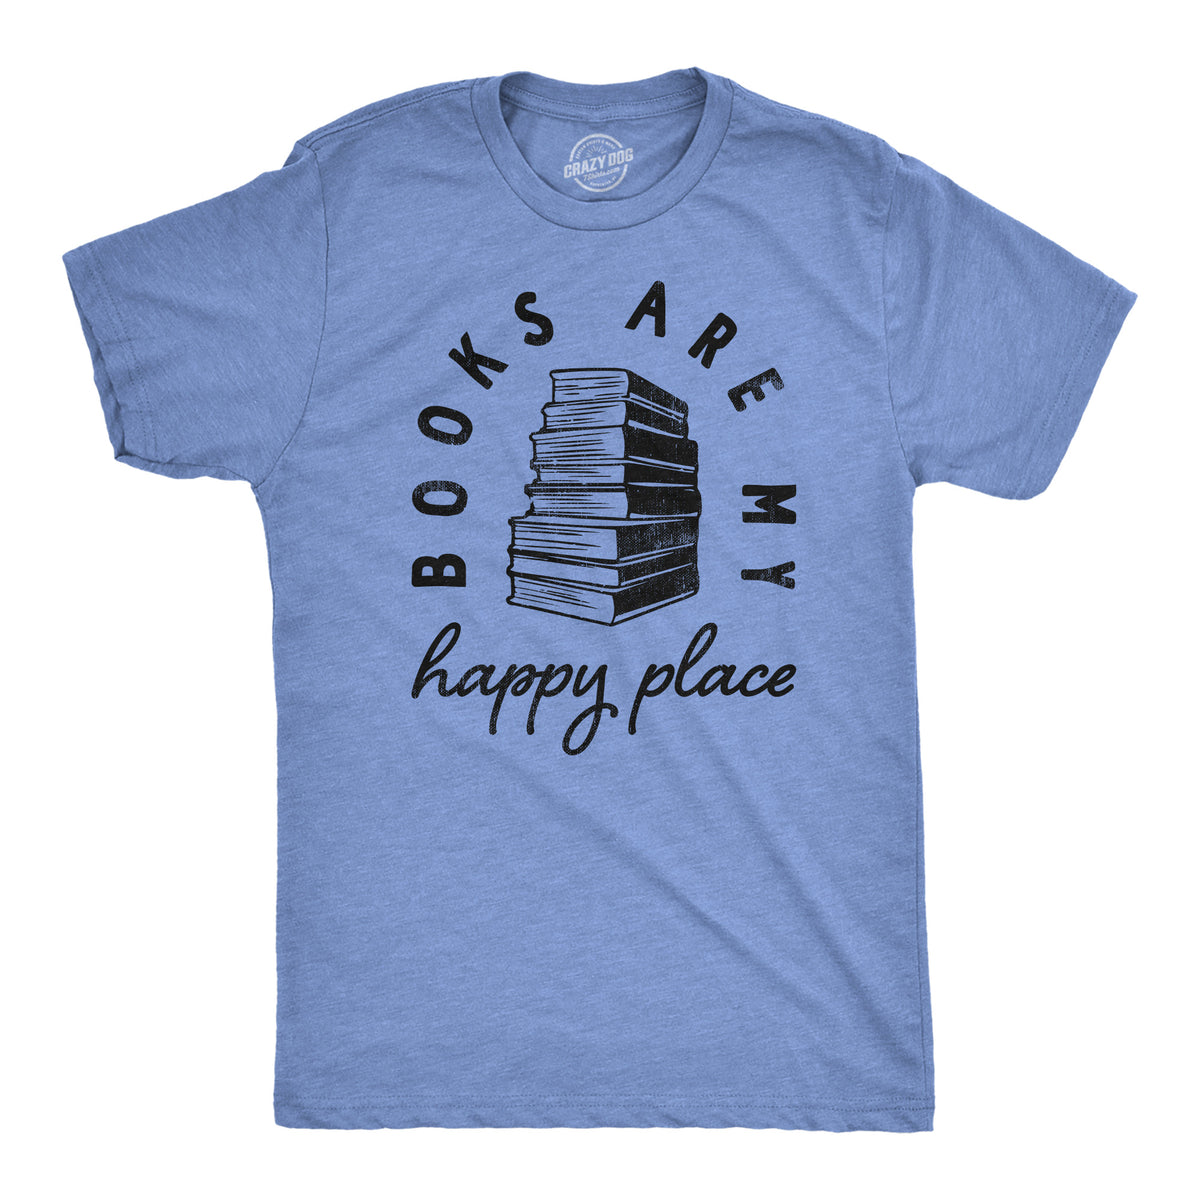 Funny Light Heather Blue - BOOKS Books Are My Happy Place Mens T Shirt Nerdy Nerdy Tee